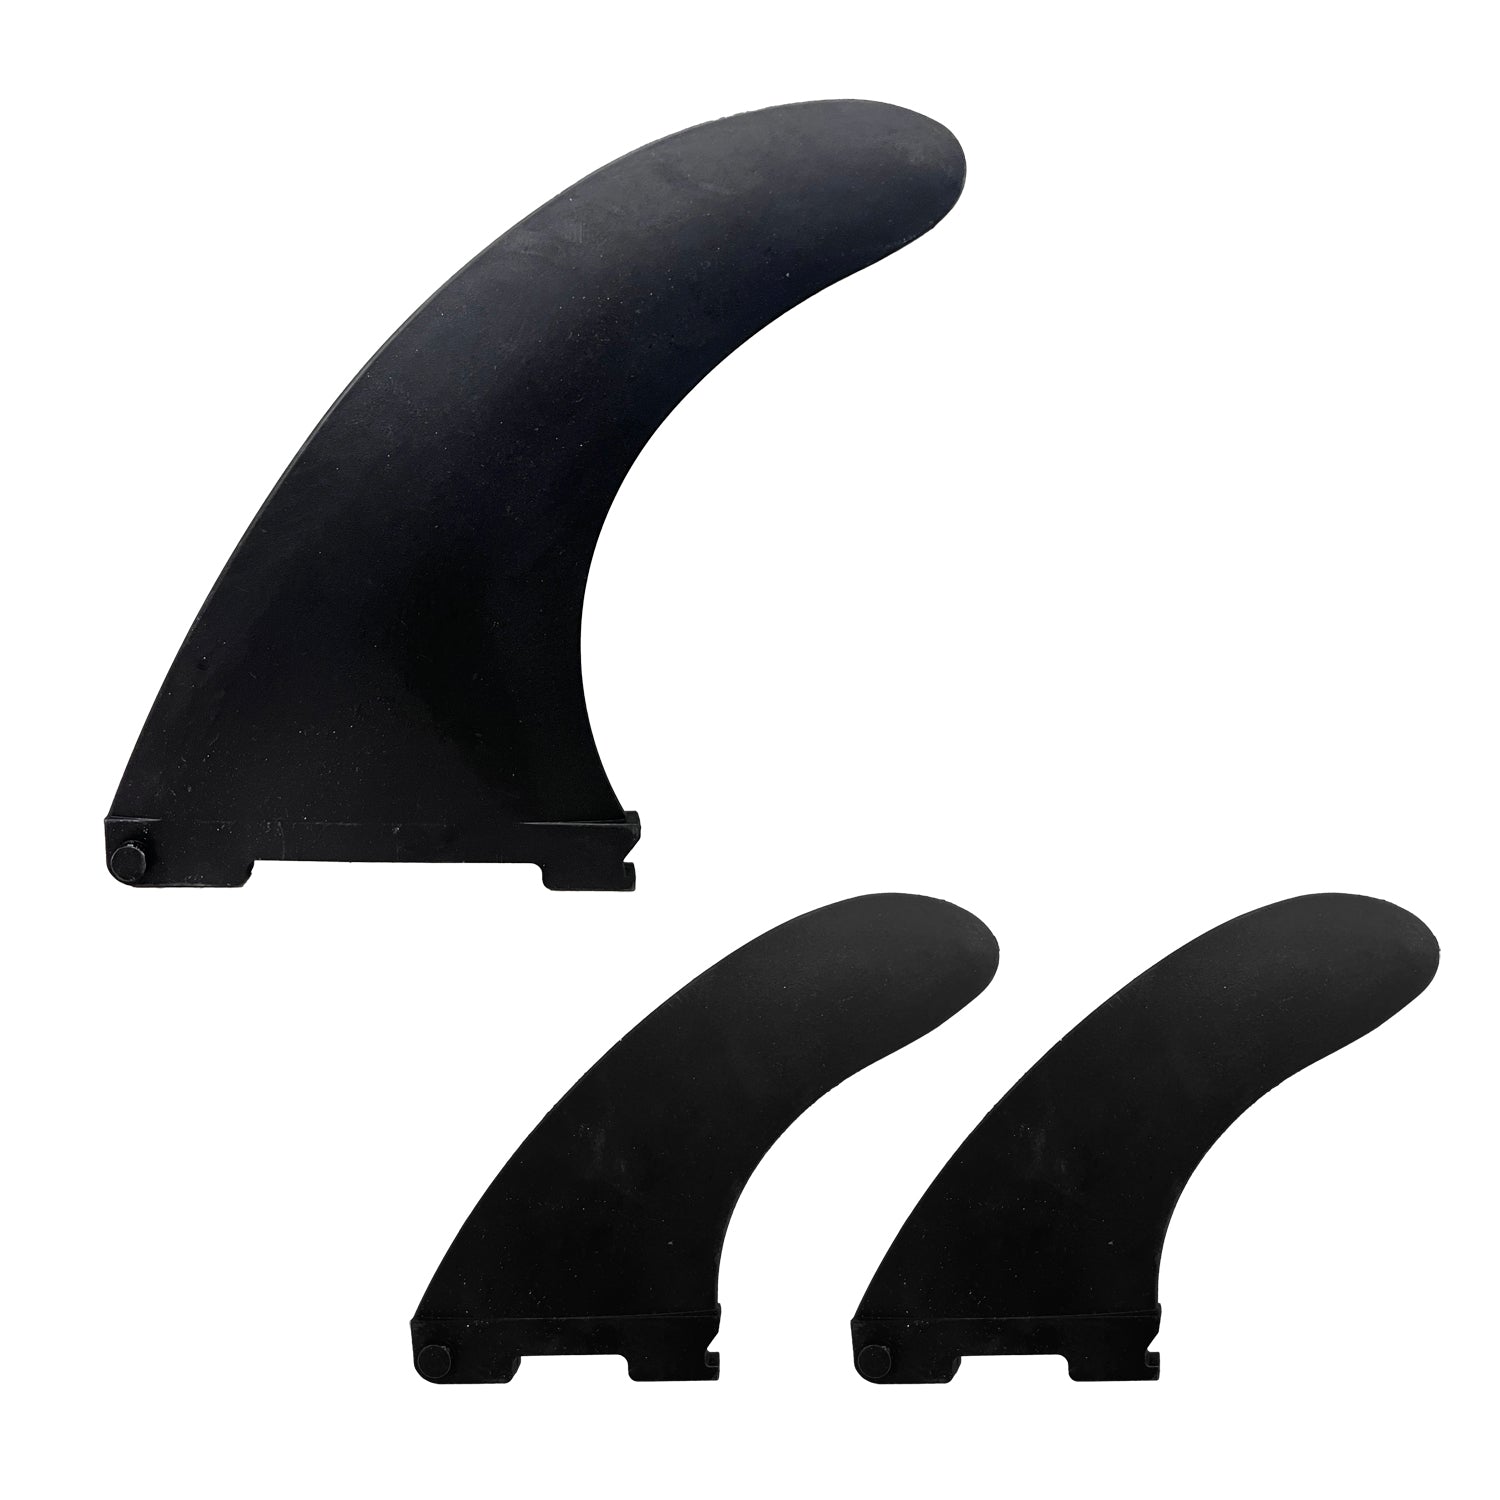 Center & Side Fin Package